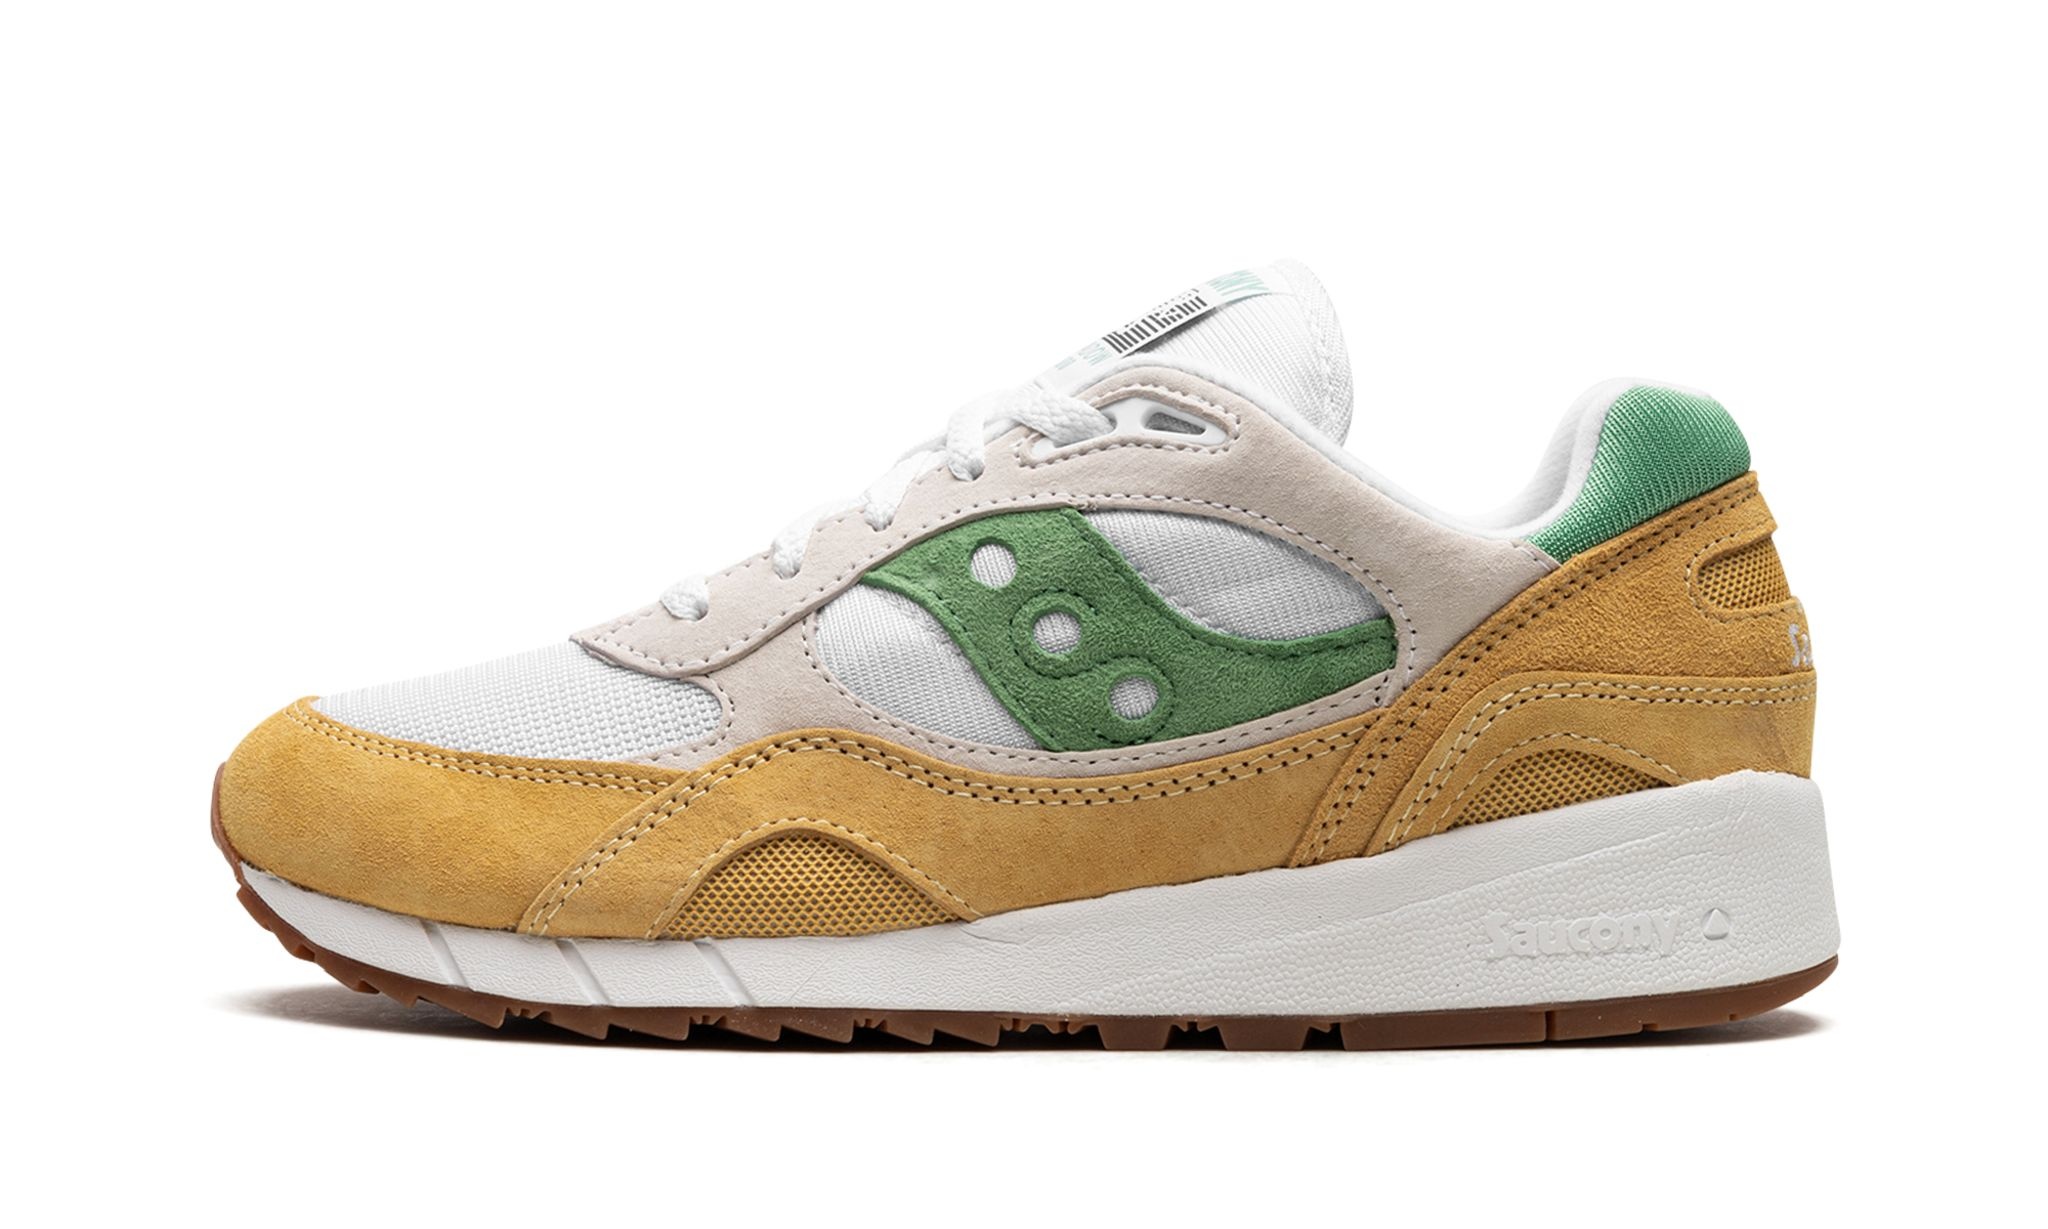 Saucony Shadow 6000 "White/Yellow/Green" - 1